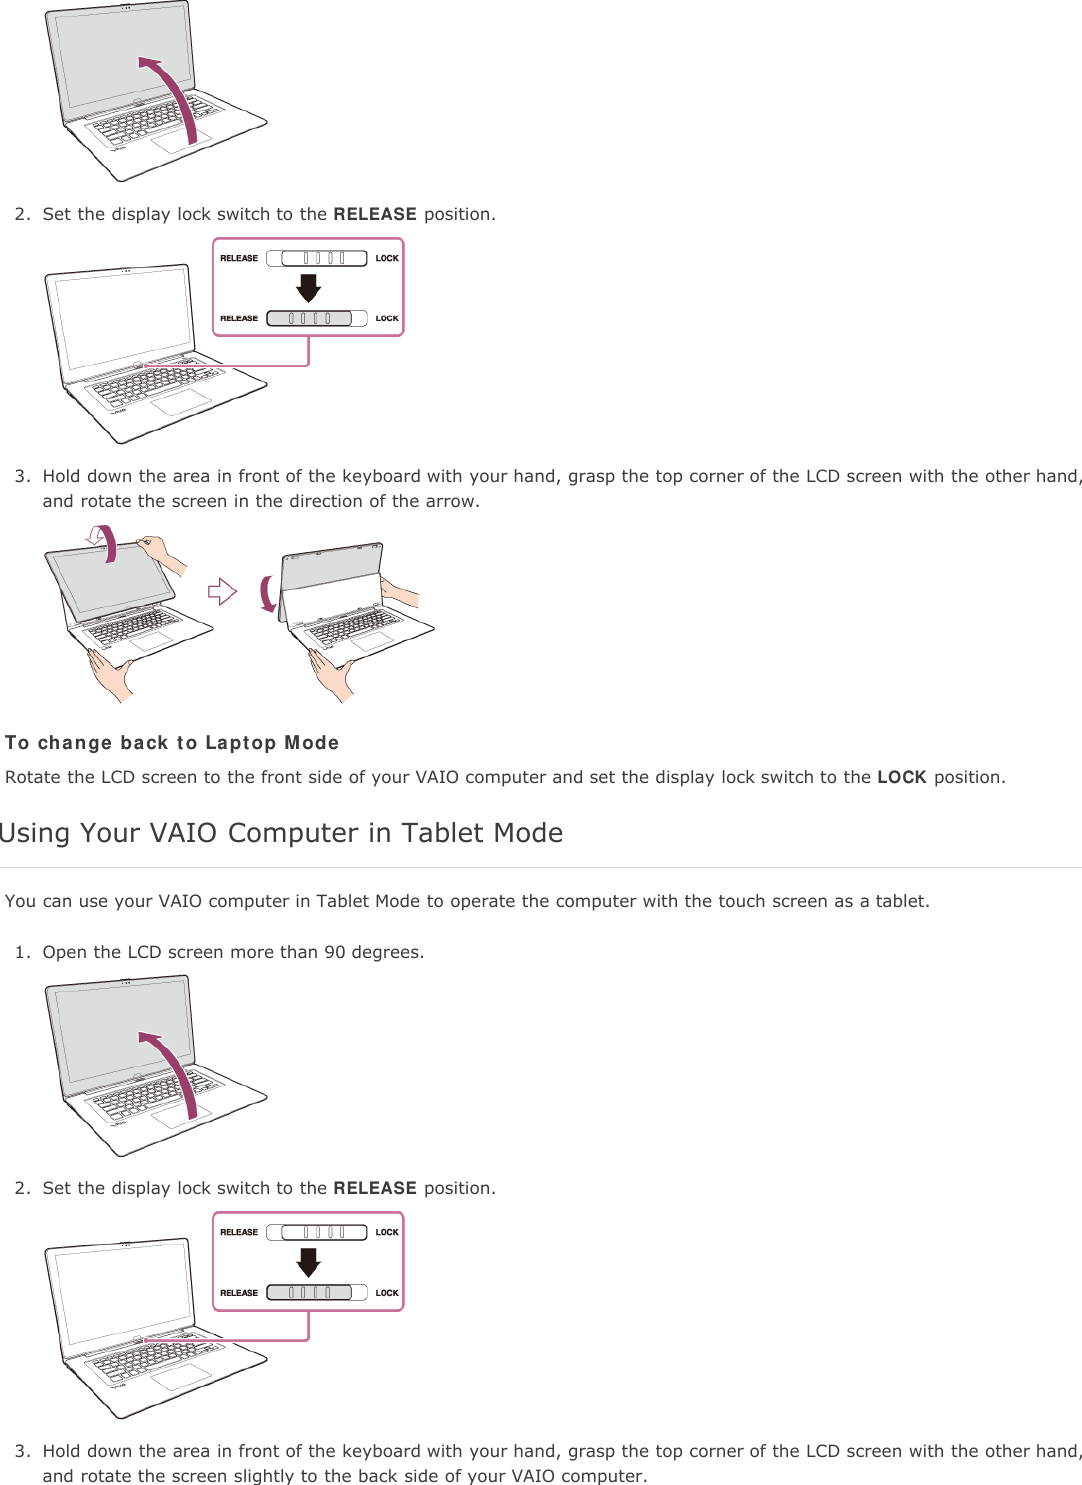 2. Set the display lock switch to the RELEASE position.3. Hold down the area in front of the keyboard with your hand, grasp the top corner of the LCD screen with the other hand,and rotate the screen in the direction of the arrow.To change back to Laptop ModeRotate the LCD screen to the front side of your VAIO computer and set the display lock switch to the LOCK position.Using Your VAIO Computer in Tablet ModeYou can use your VAIO computer in Tablet Mode to operate the computer with the touch screen as a tablet.1. Open the LCD screen more than 90 degrees.2. Set the display lock switch to the RELEASE position.3. Hold down the area in front of the keyboard with your hand, grasp the top corner of the LCD screen with the other hand,and rotate the screen slightly to the back side of your VAIO computer.